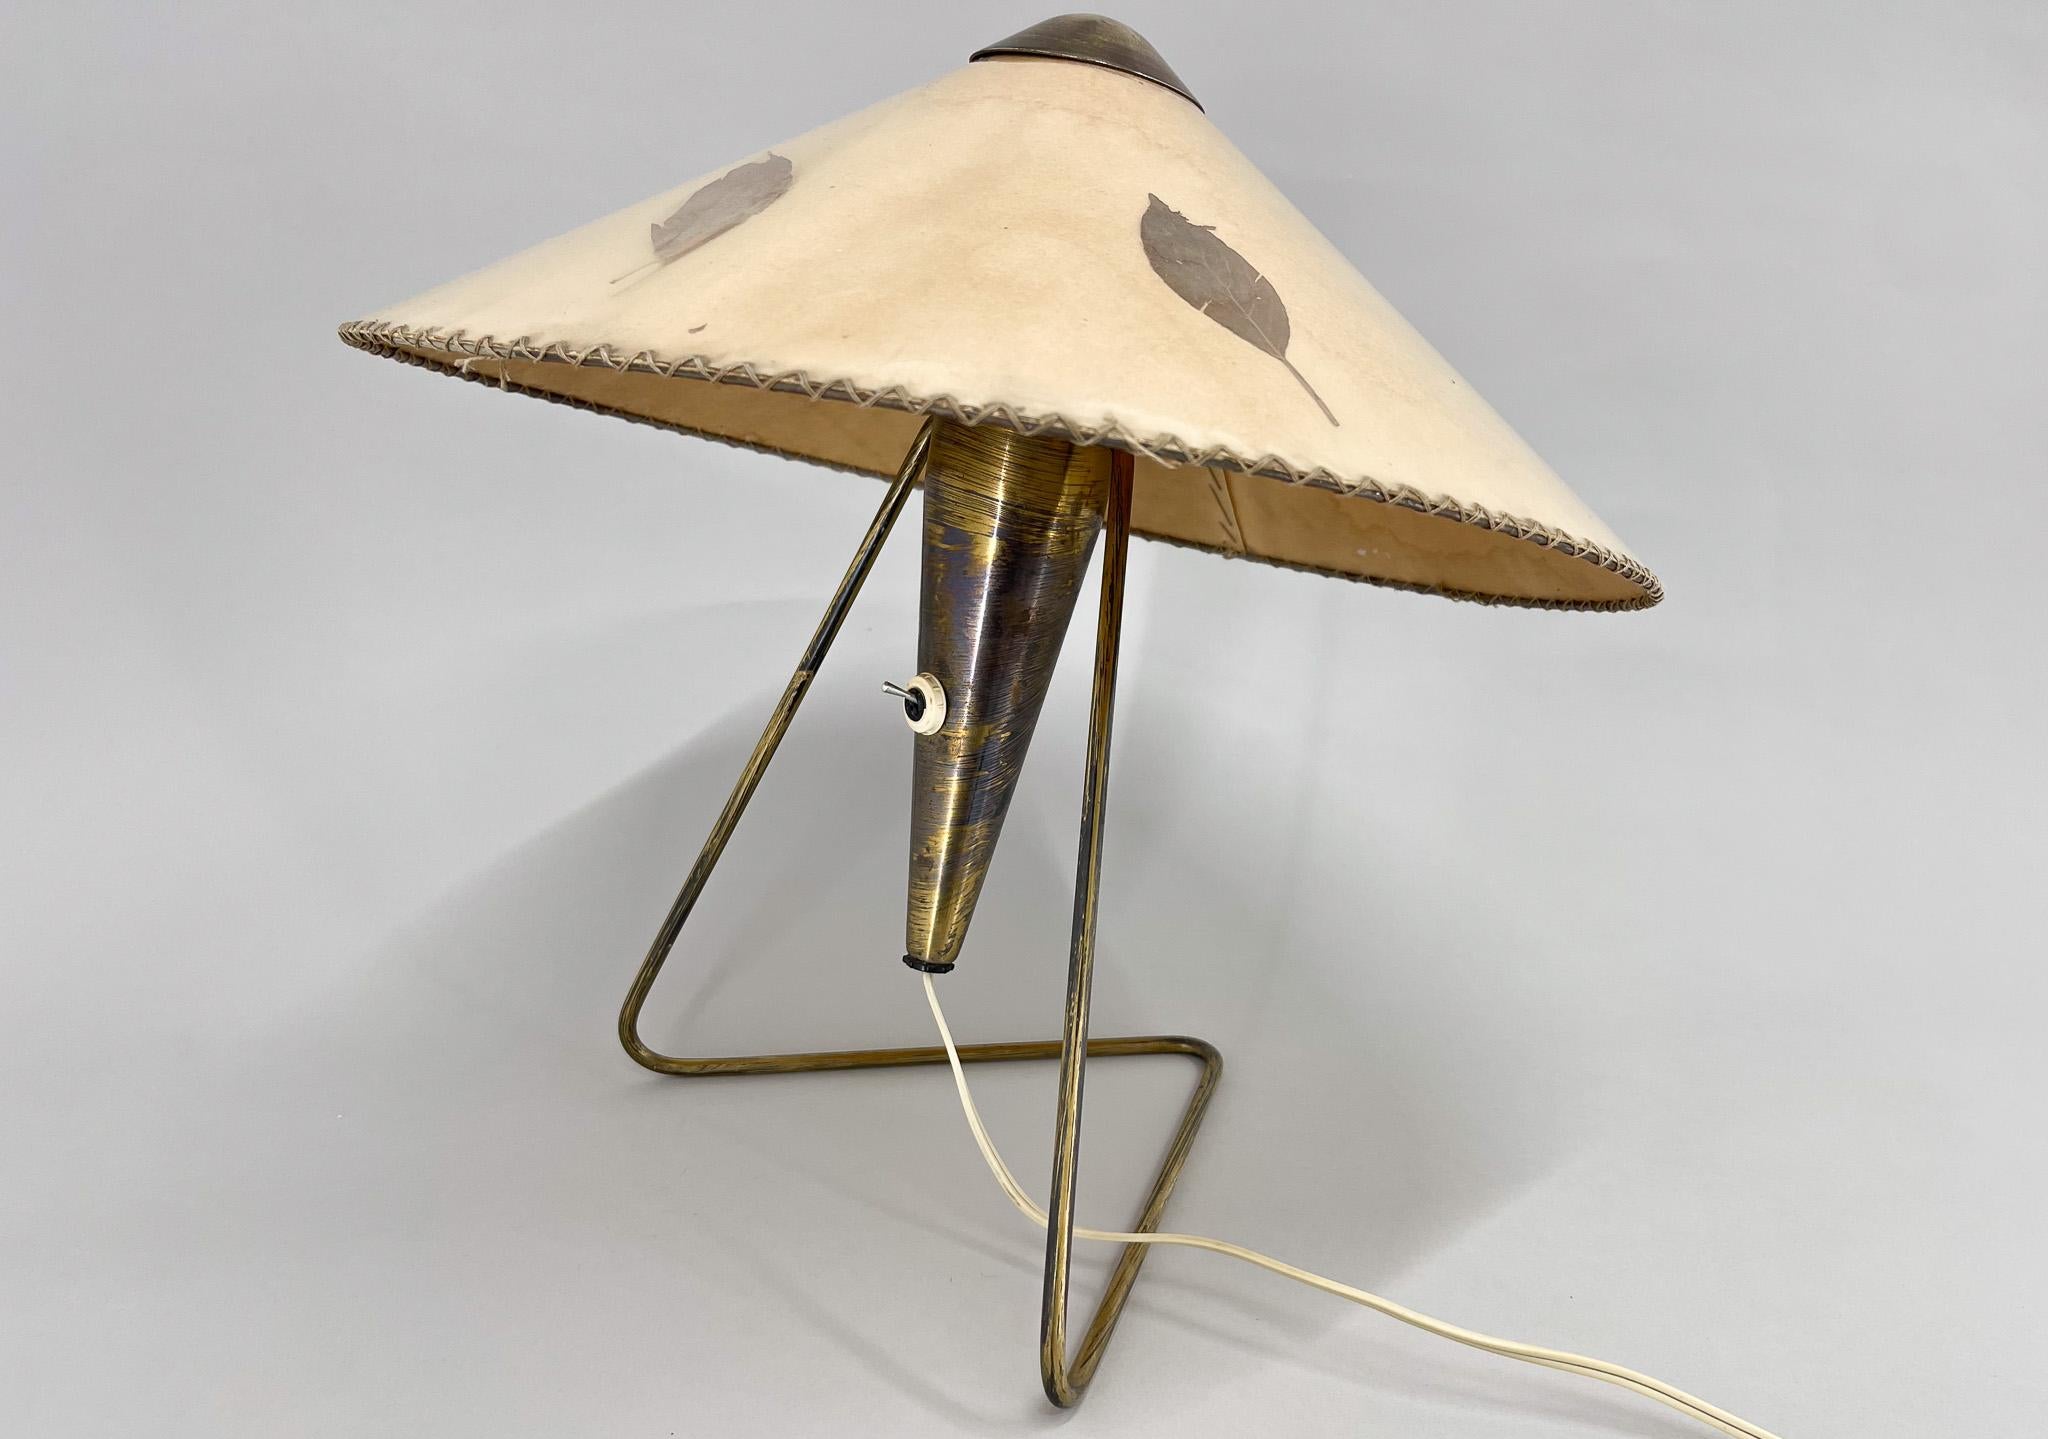 Vintage lamp by designer Helena Frantova for OKOLO, Czechoslovakia. The lamp has very rare original lamp shade and original, fully functional wiring. It is possible to hang it on the wall. Biggest version of the lamp. There are some obvious signs of